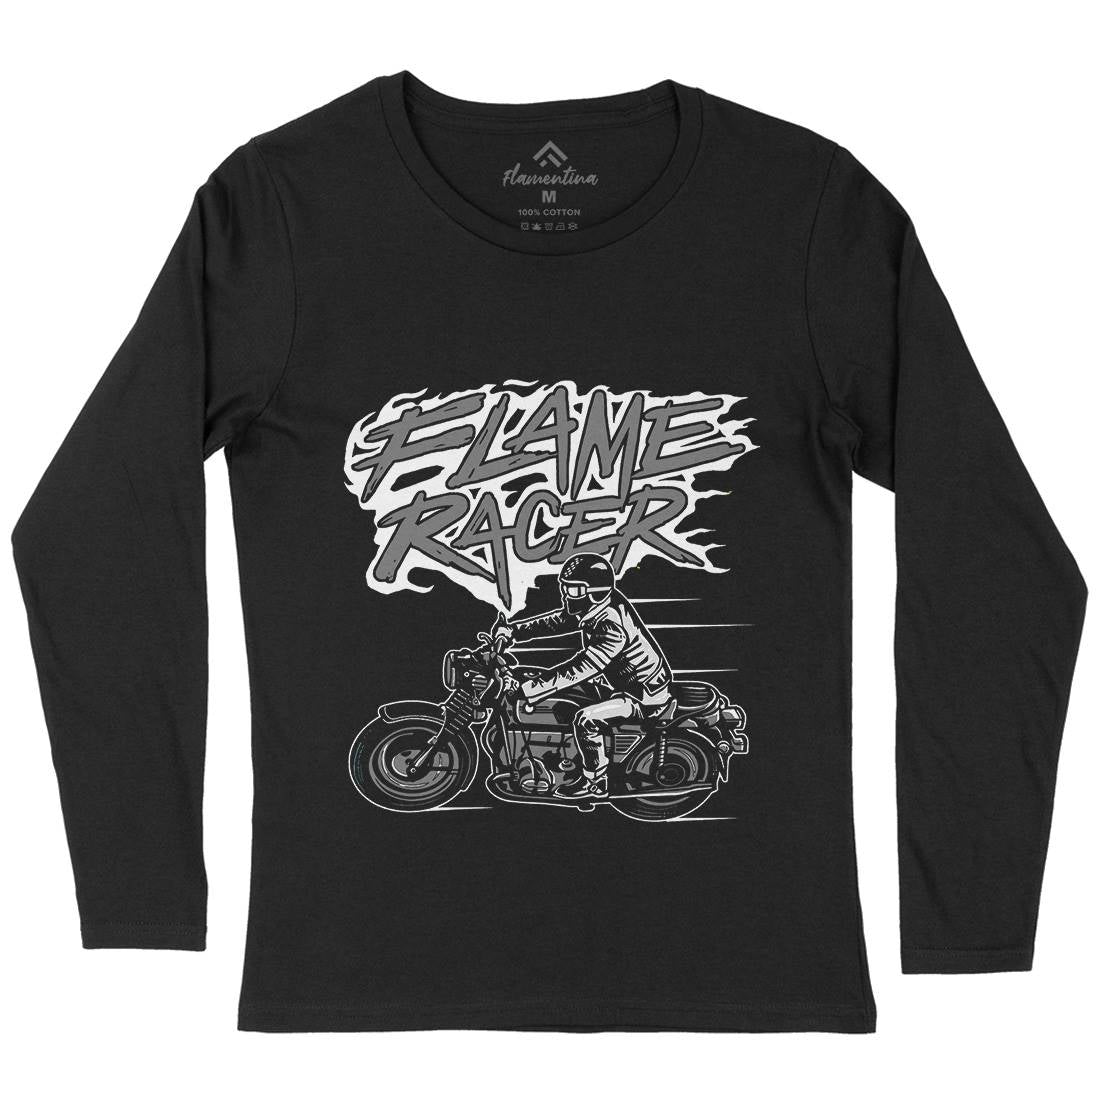 Flame Racer Womens Long Sleeve T-Shirt Motorcycles A530